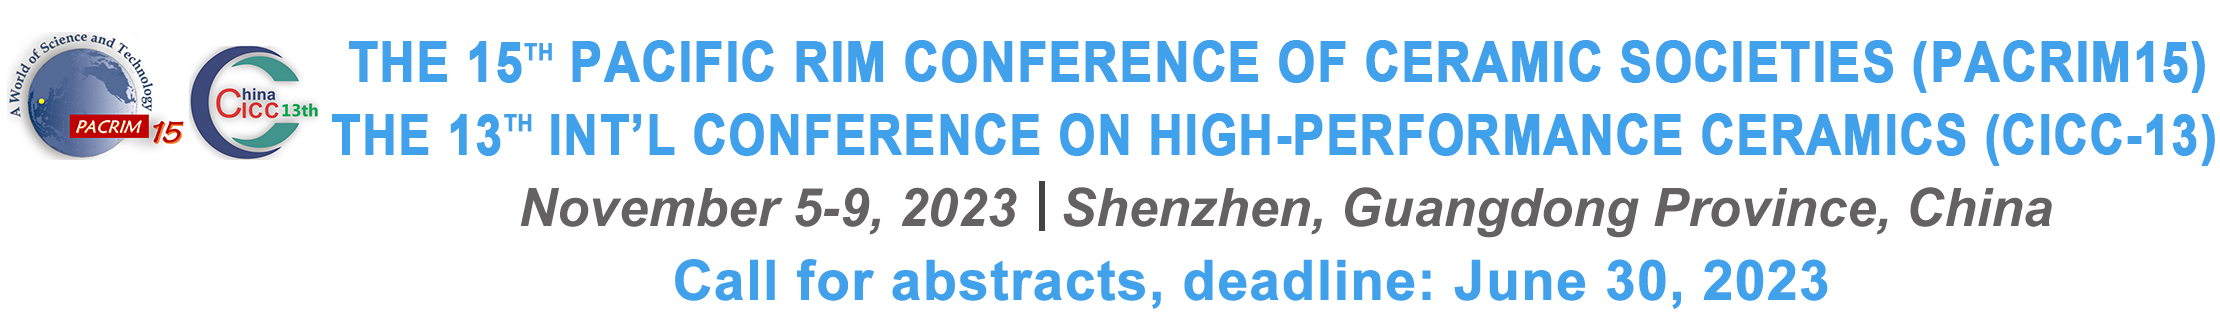 Welcome to PACRIM15 & CICC-13 in Shenzhen, China !